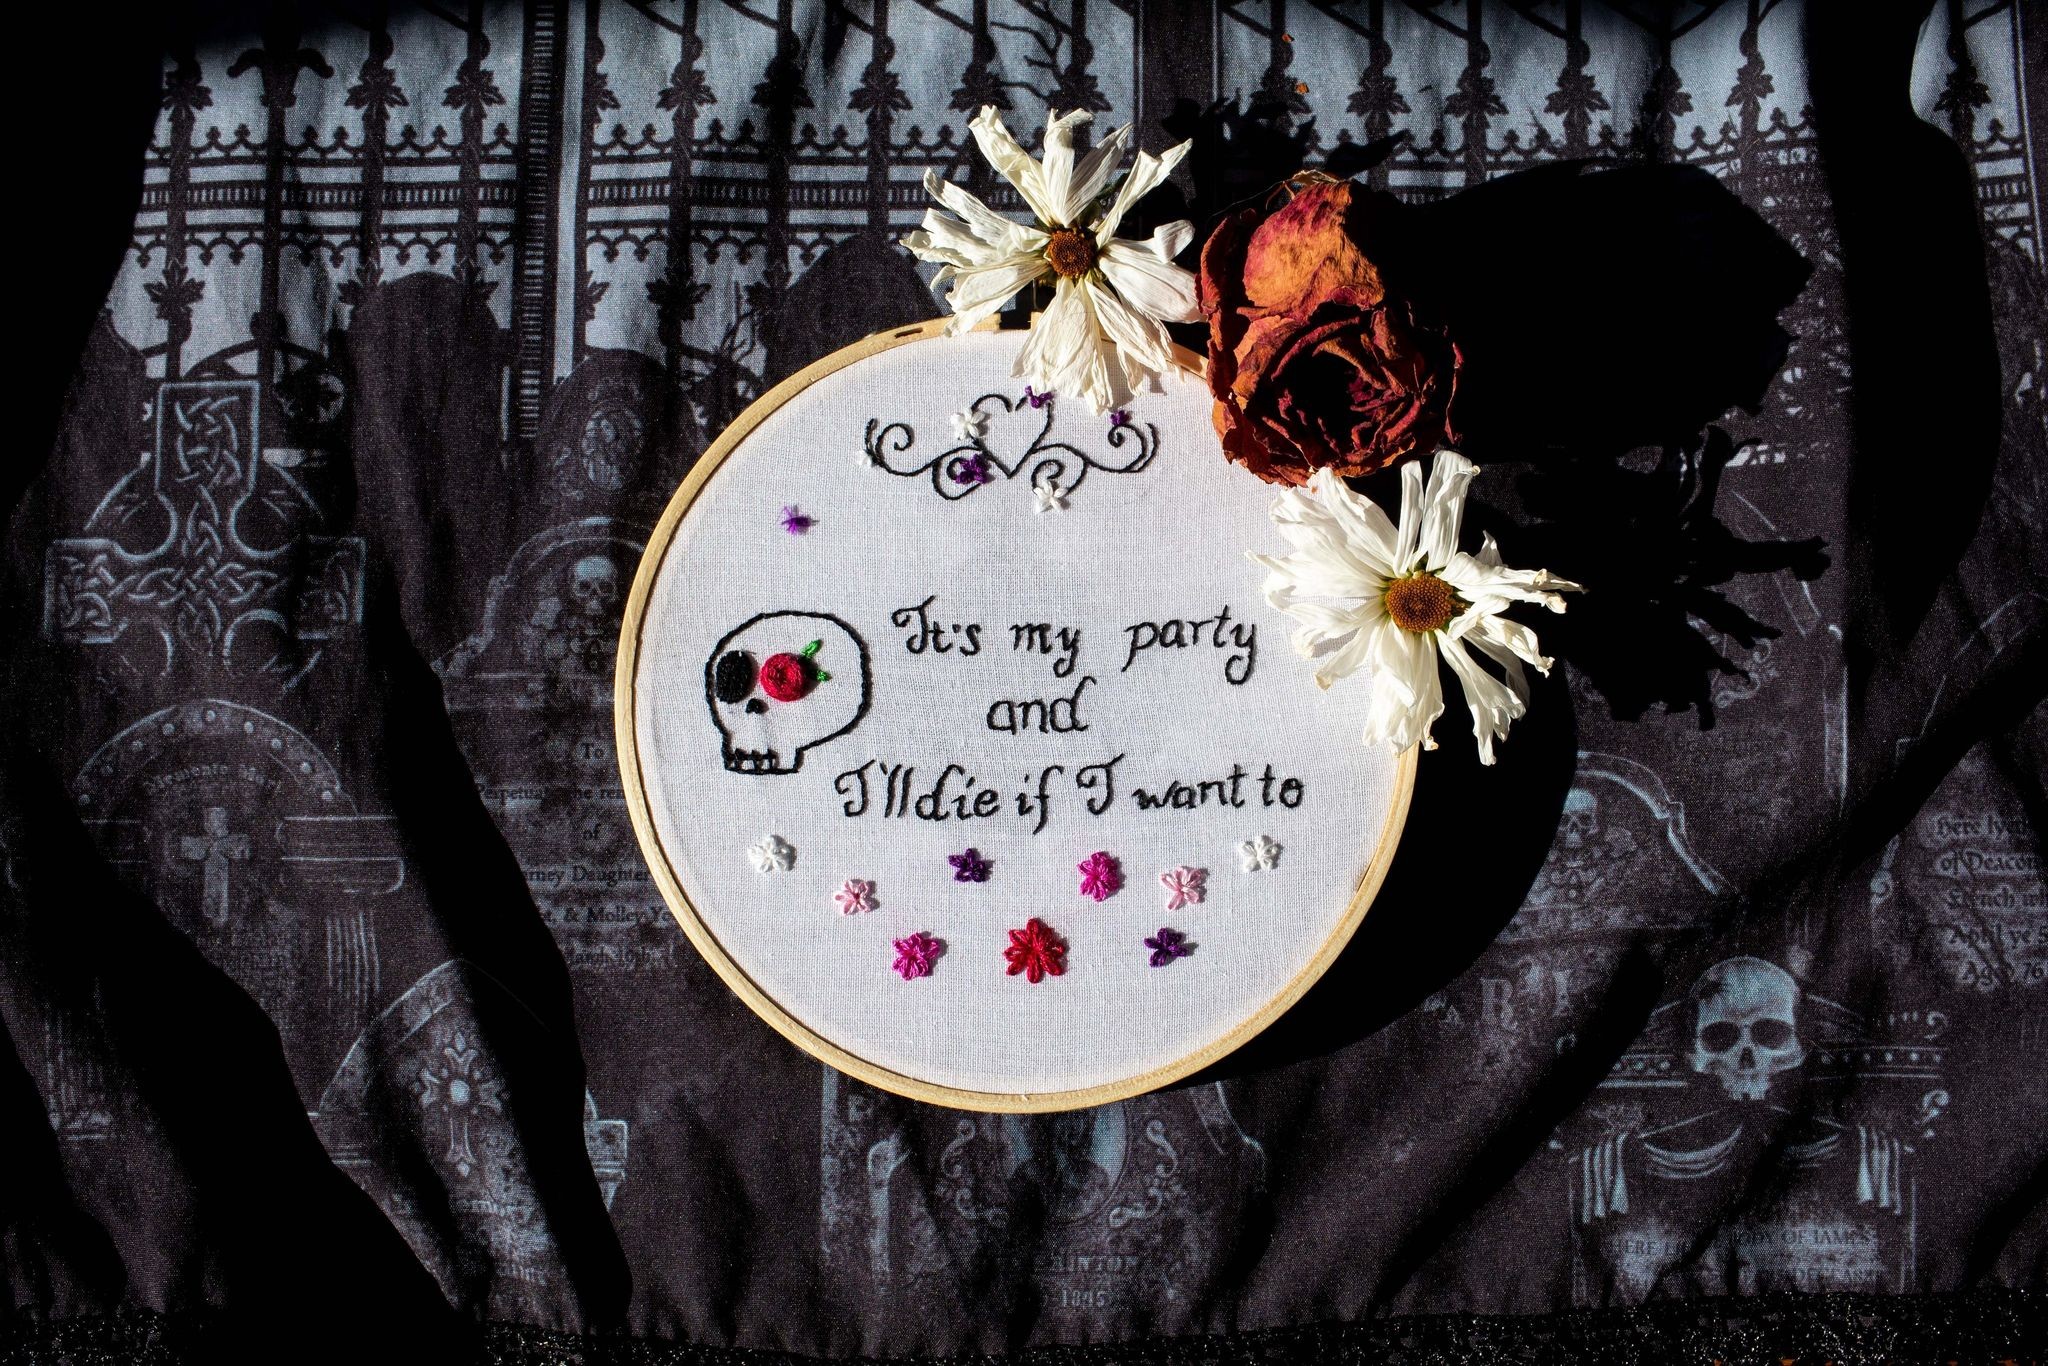 Image of "It's My Party" Casper Embroidery